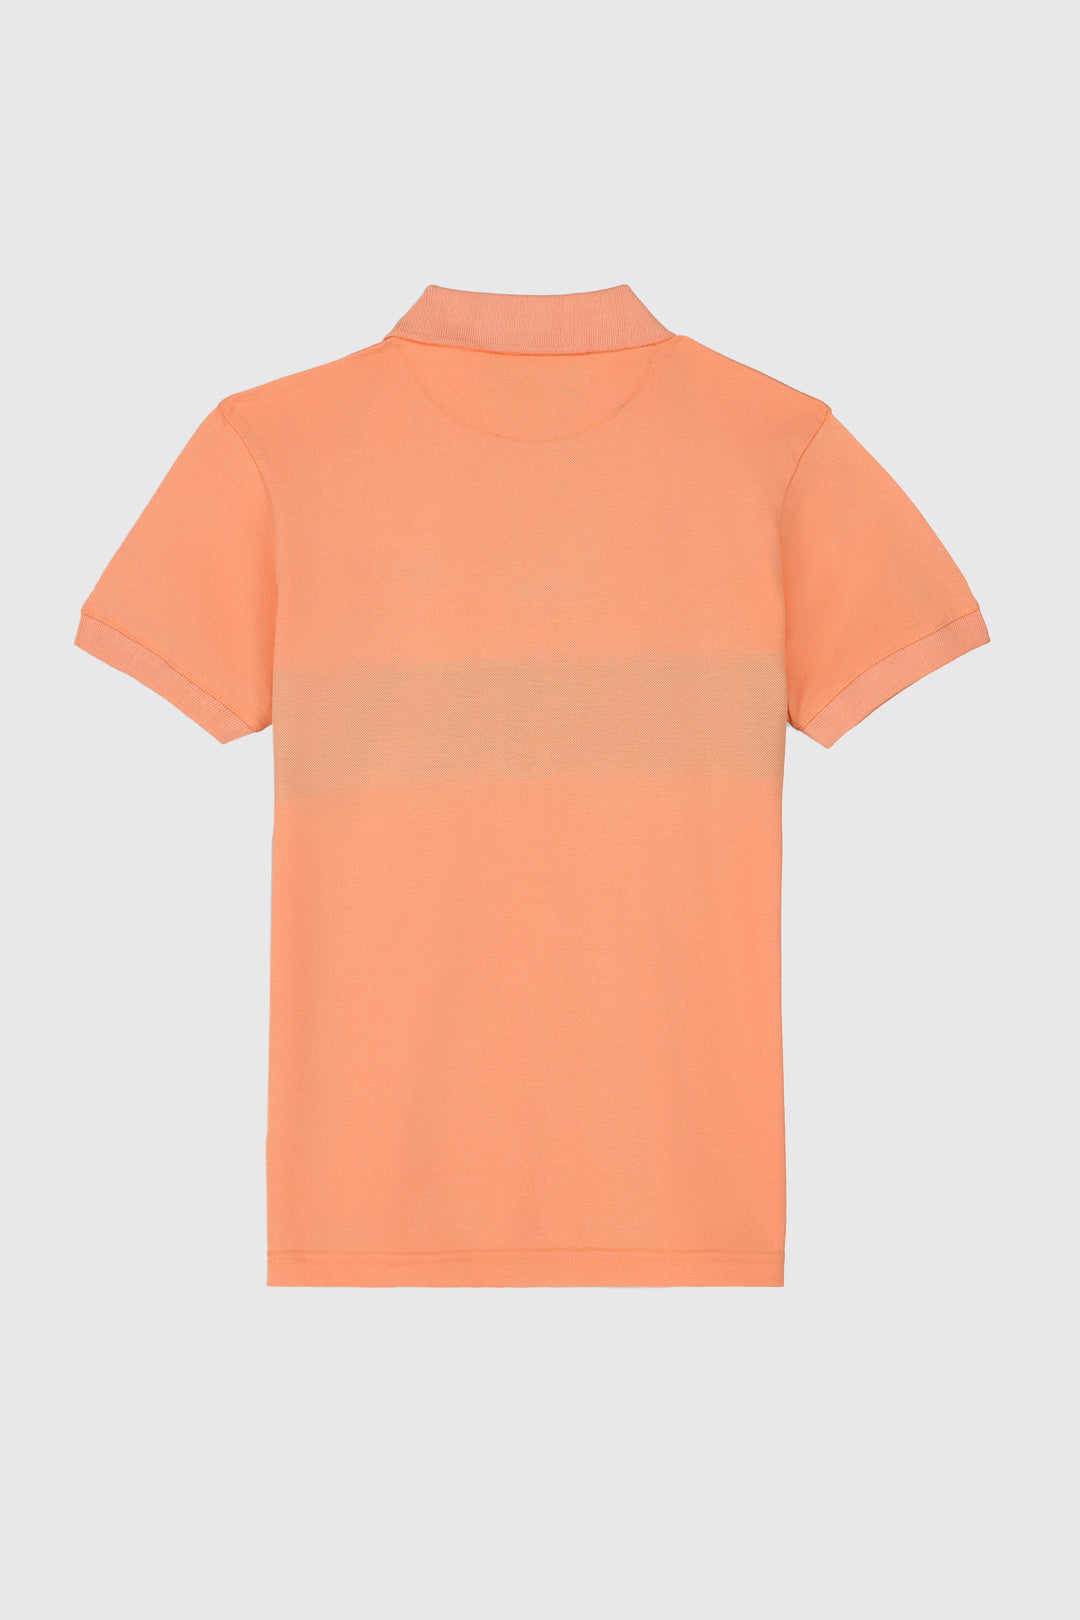 Orange Contrast Panelled Embroidered Polo Shirt - S23 - MP0230R